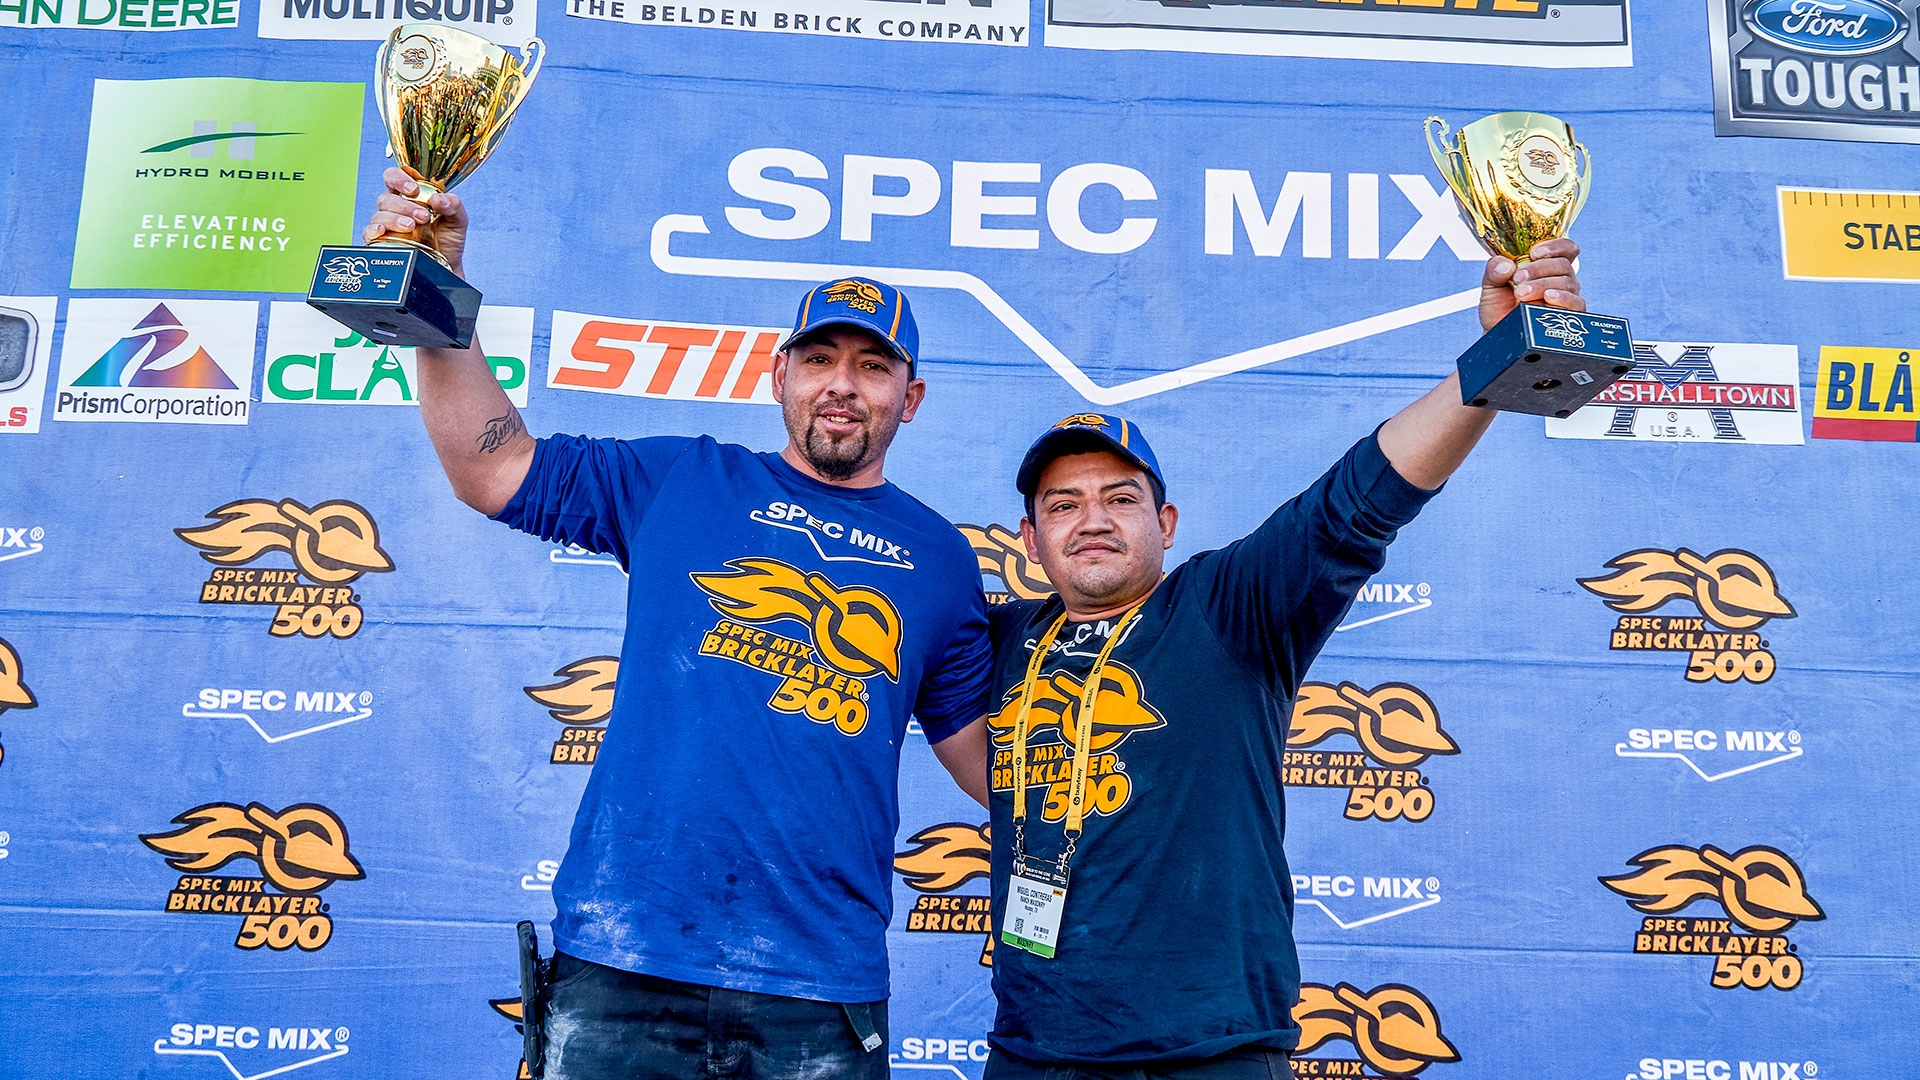 Bricklayer David Chavez (left) and his mason tender, Miguel Contreras (right), celebrate winning the 2018 SPEC MIX BRICKLAYER 500® World Championship.